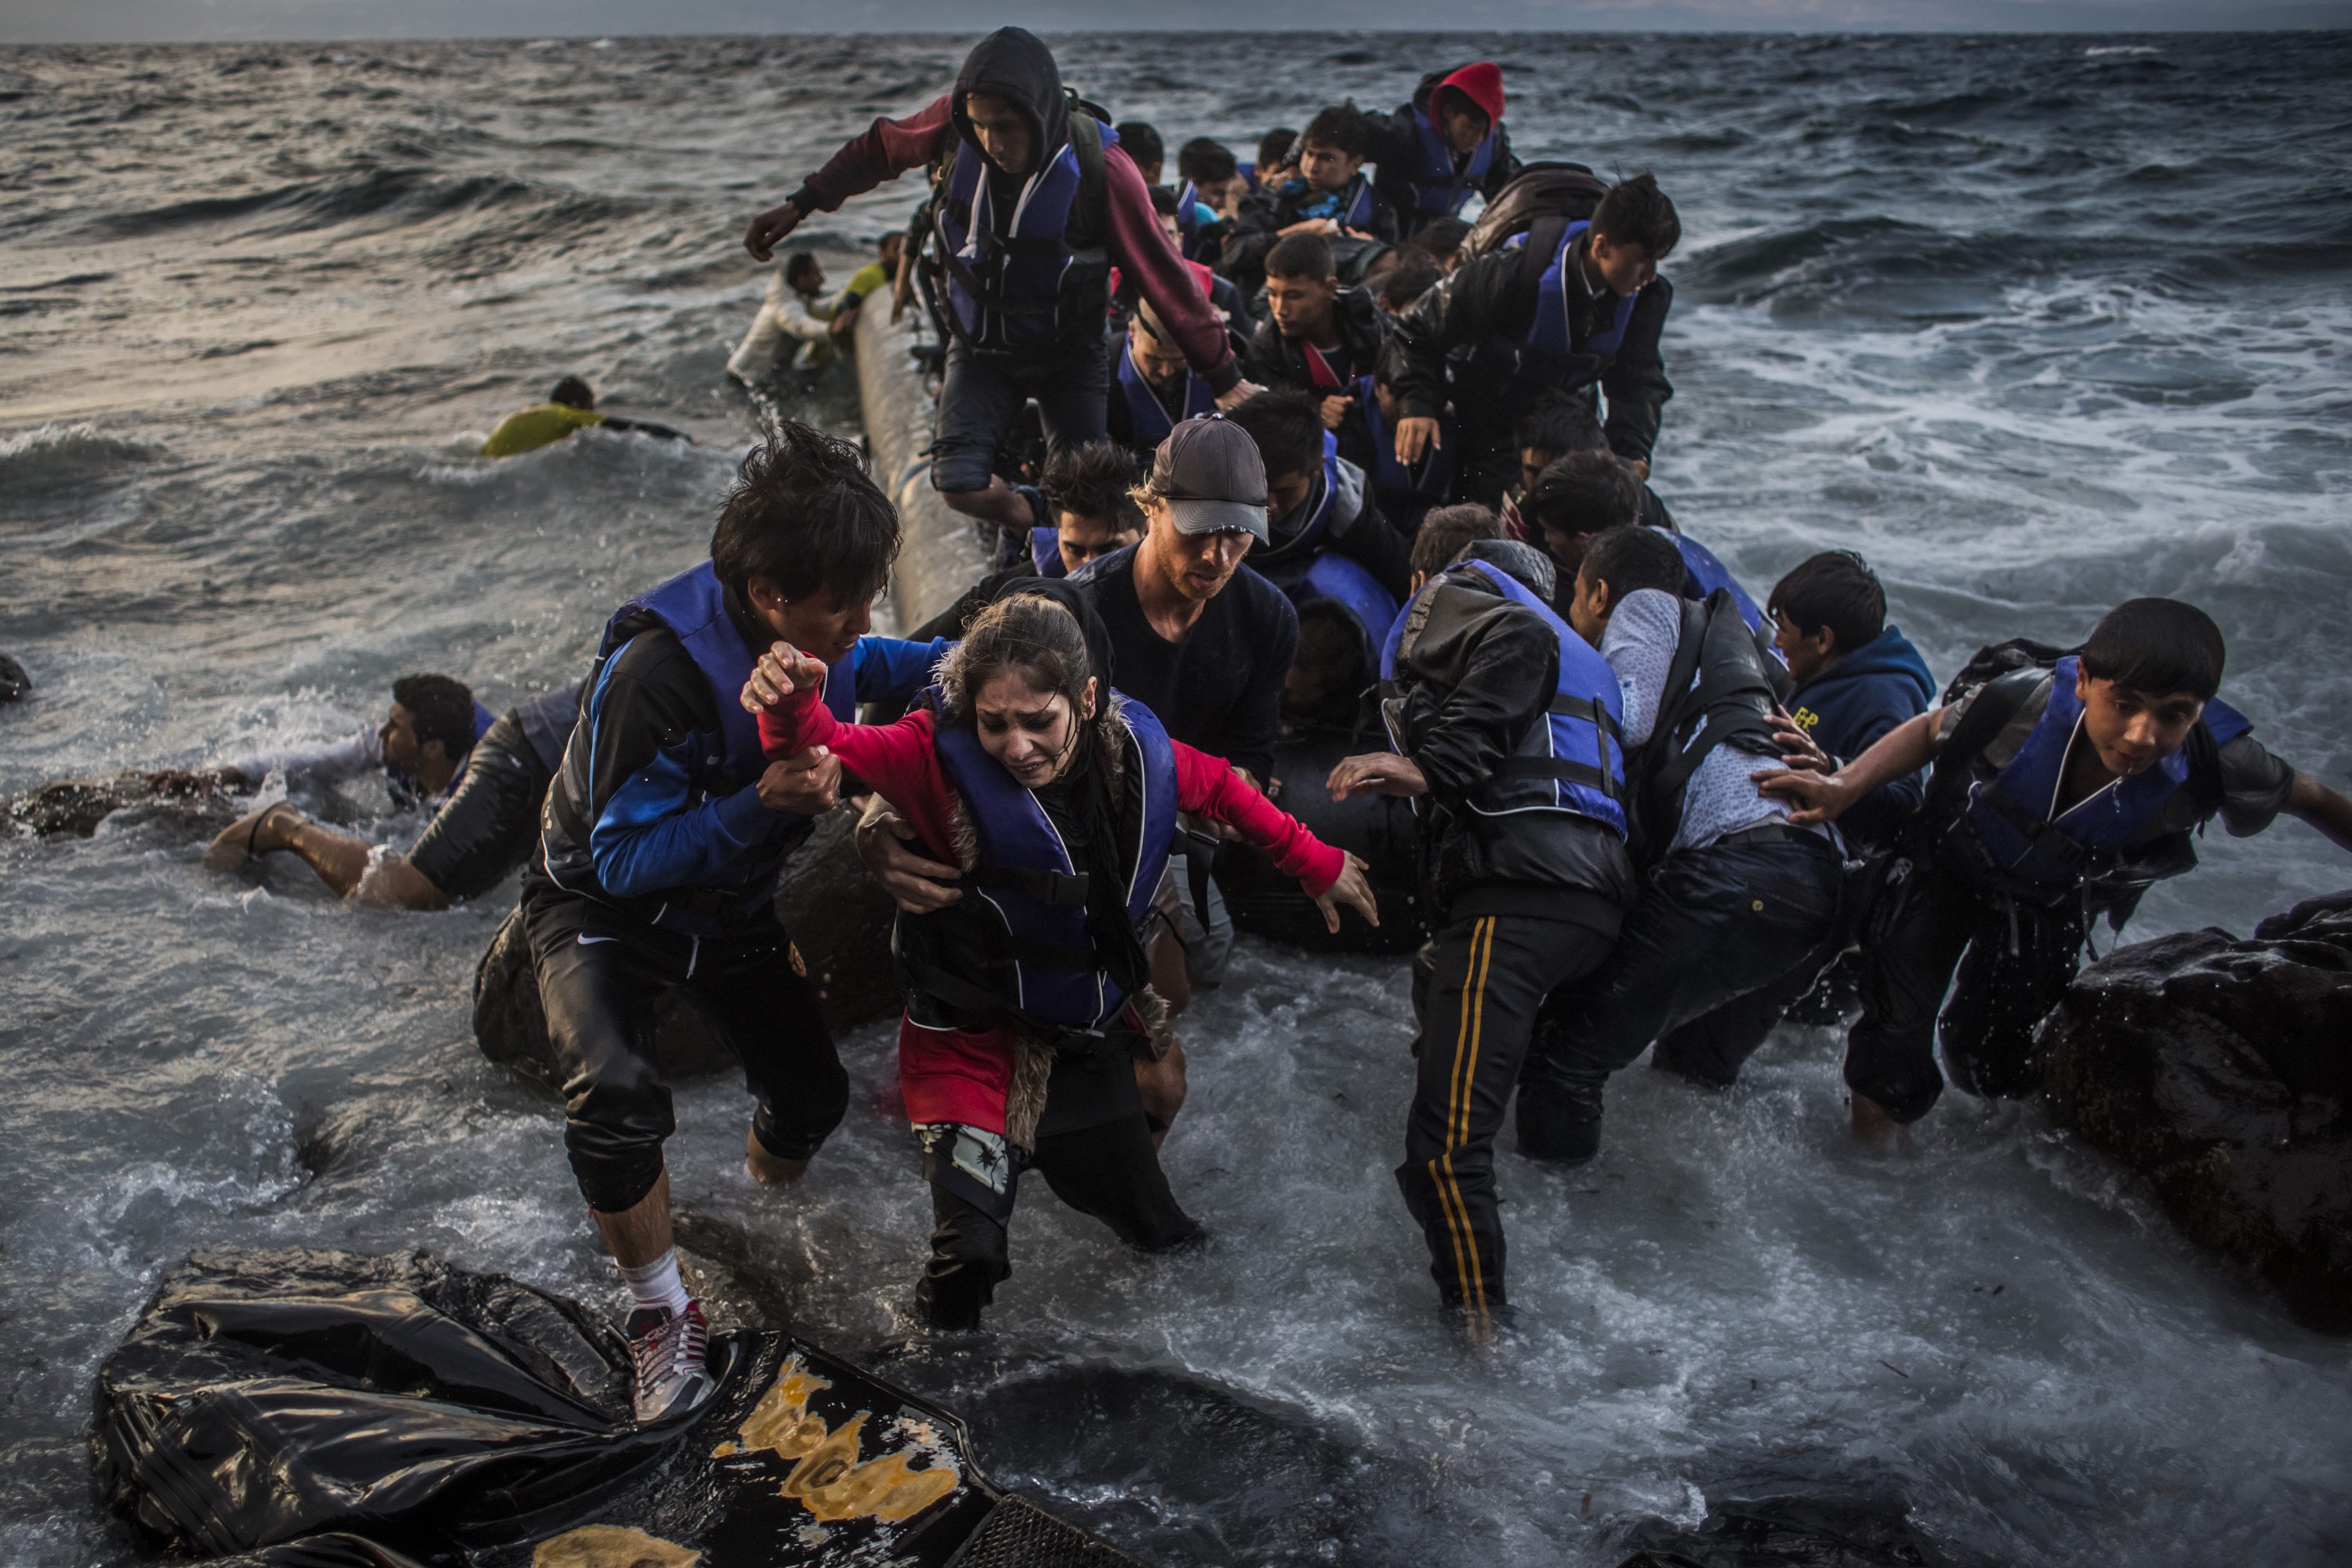 Migrants Arrive On The Beaches Of Lesbos Having Made The Crossing From Turkey